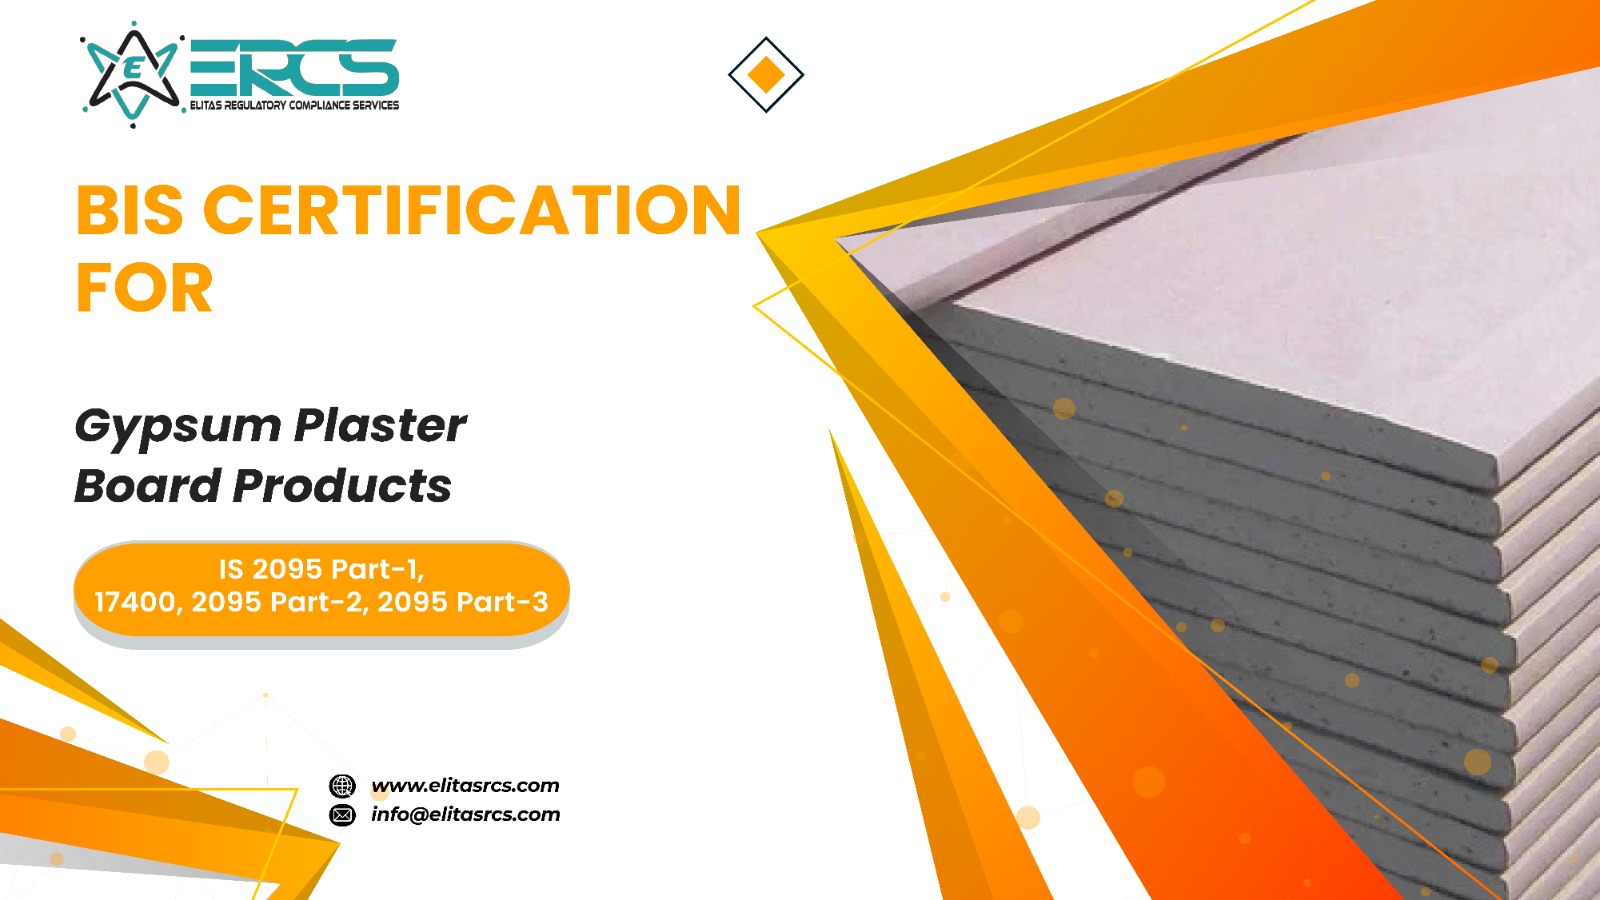 BIS Certification for Gypsum Plaster Board Products